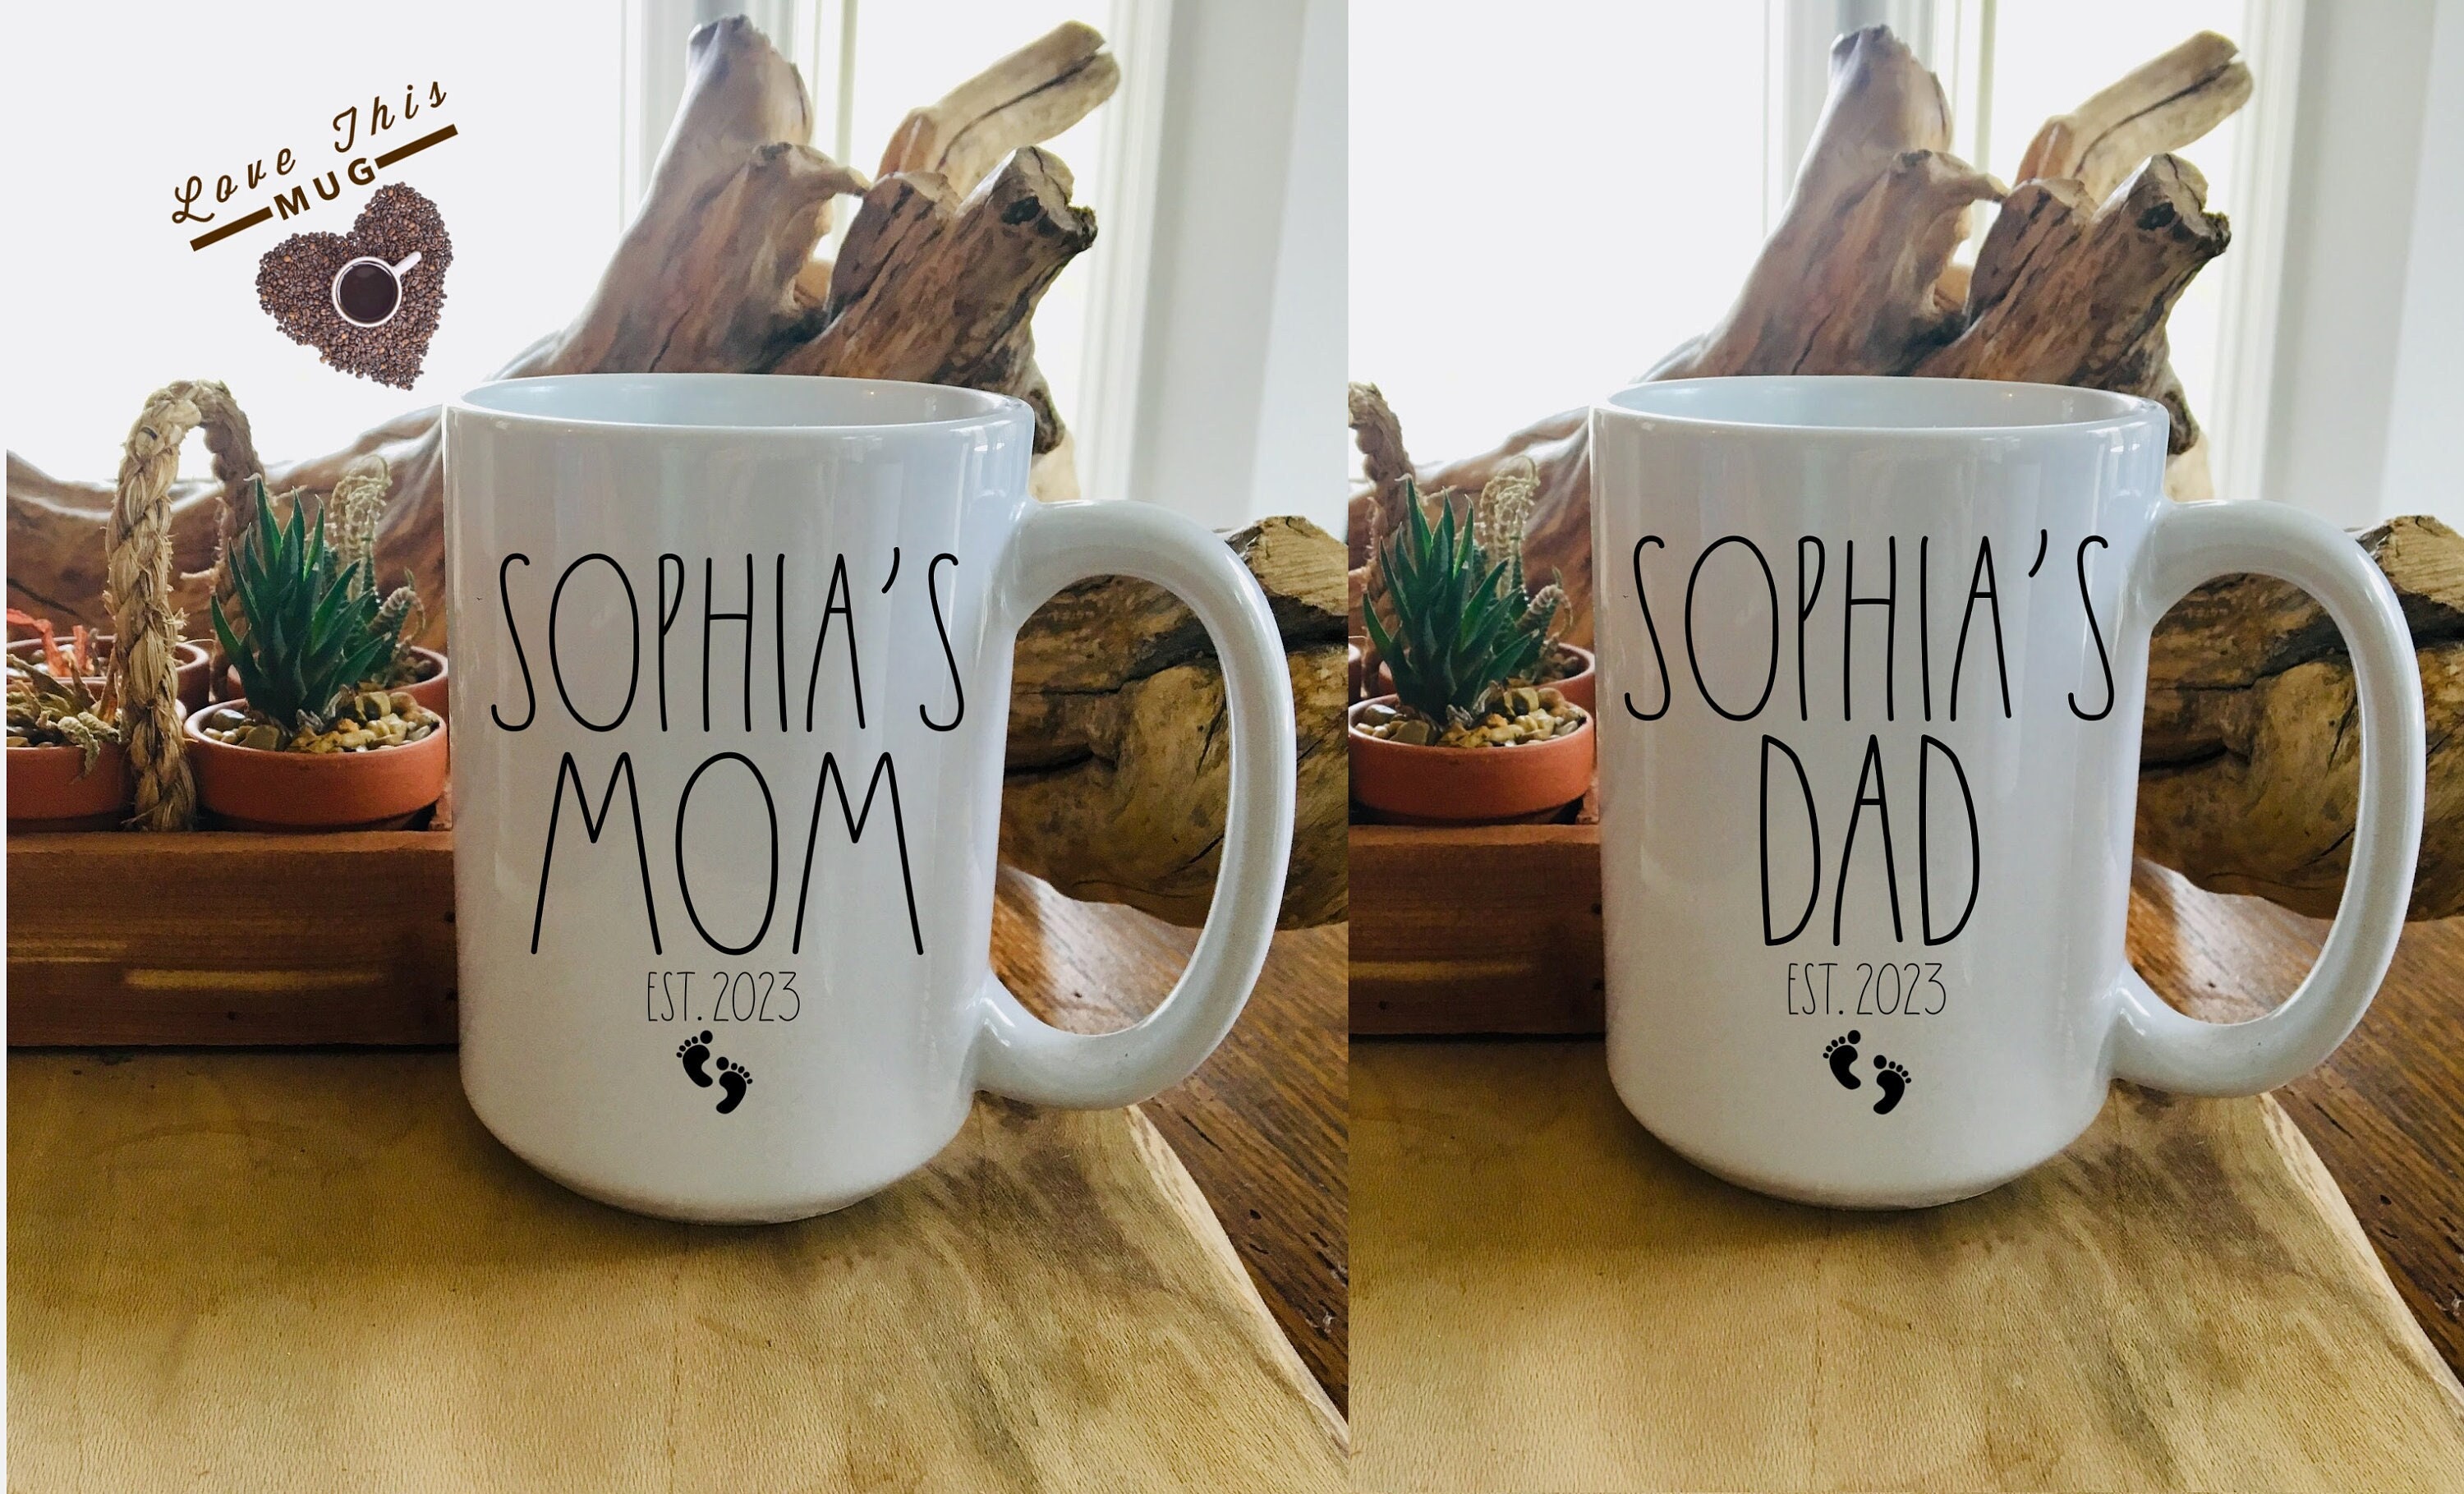 First Time Mom And Dad New Mommy Daddy Mug - Jolly Family Gifts